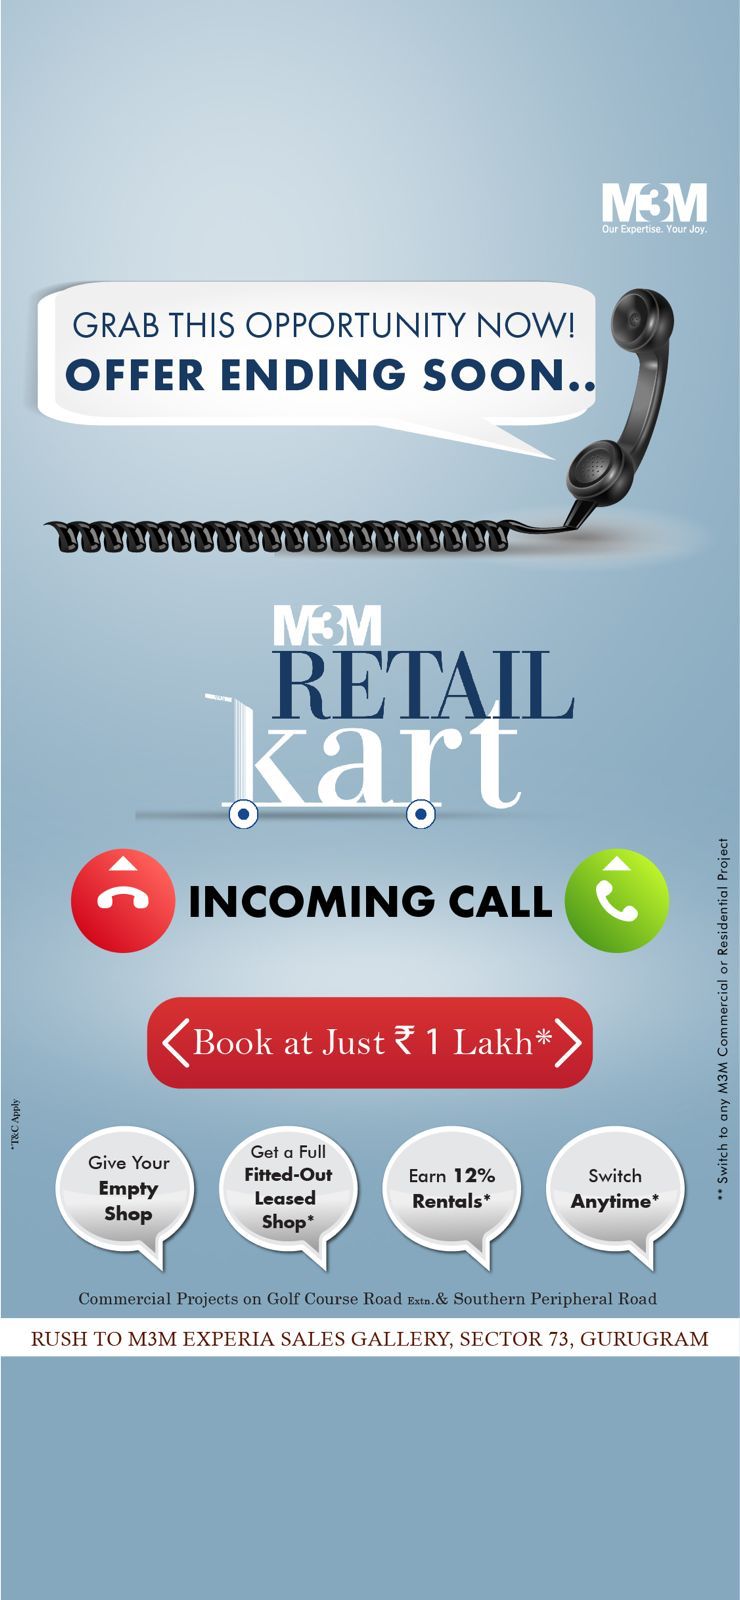 Grab this opportunity now! offer ending soon at M3M Retail Kart Update